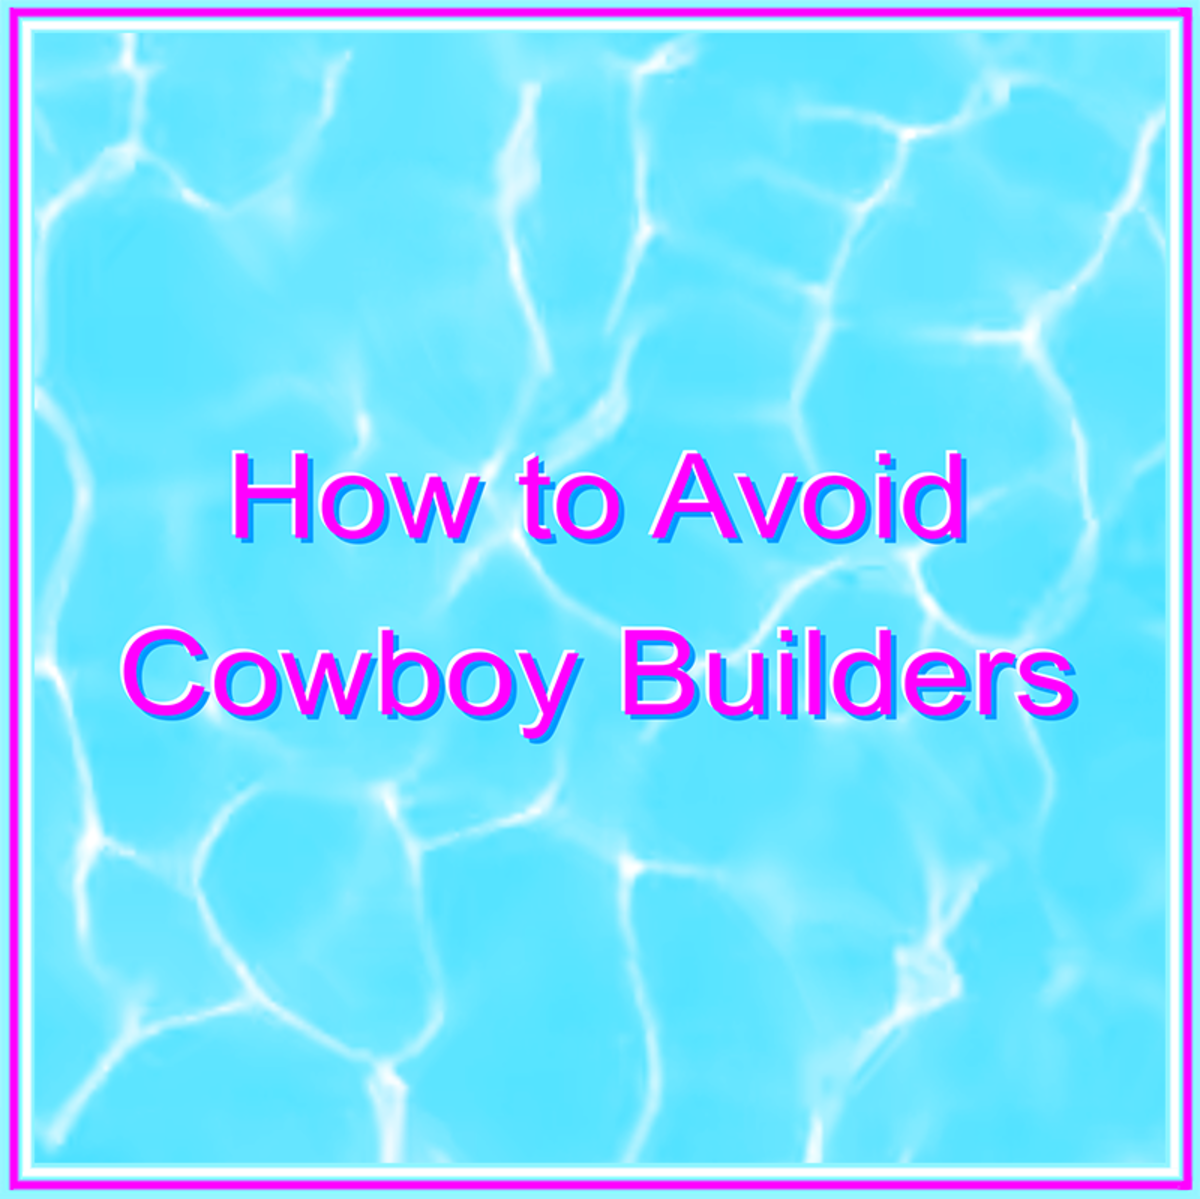 cowboy-builders-from-hell